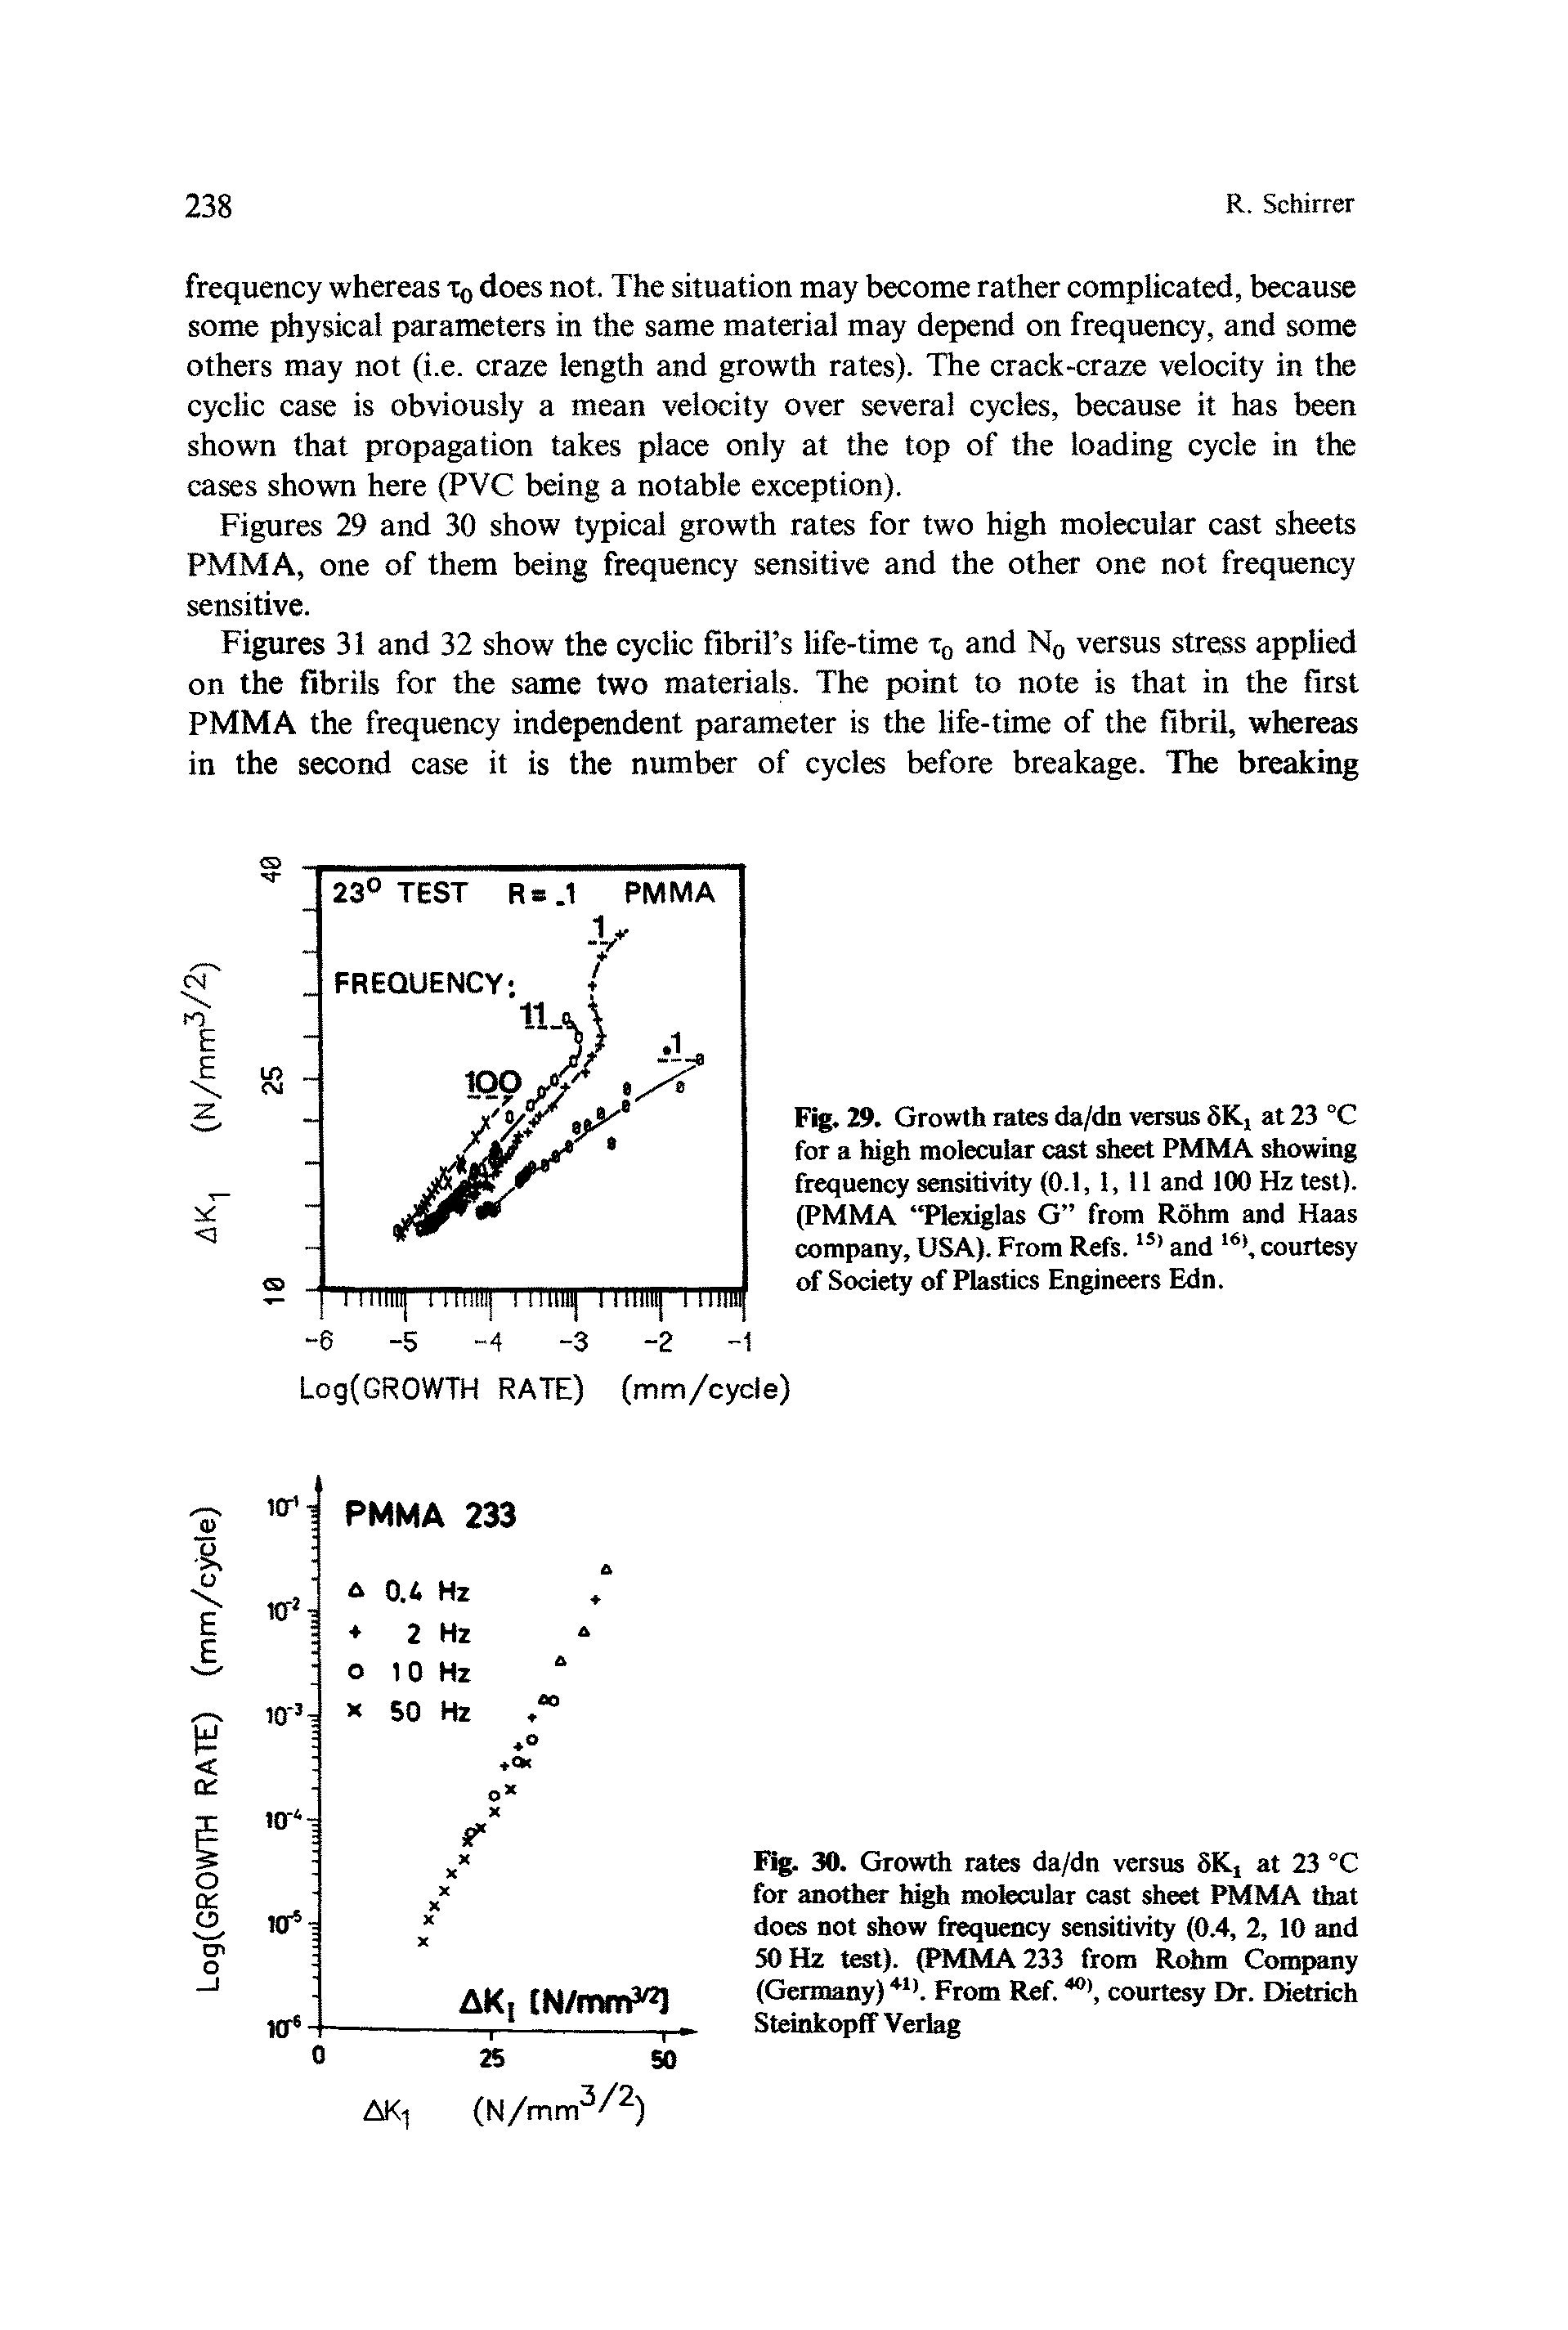 Fig. 29. Growth rates da/dn versus 8K, at 23 °C for a high molecular cast sheet PMMA showing frequency sensitivity (0.1, 1,11 and 100 Hz test). (PMMA Plexiglas G from Rohm and Haas company, USA). From Refs. and courtesy of Society of Plastics Engineers Edn.